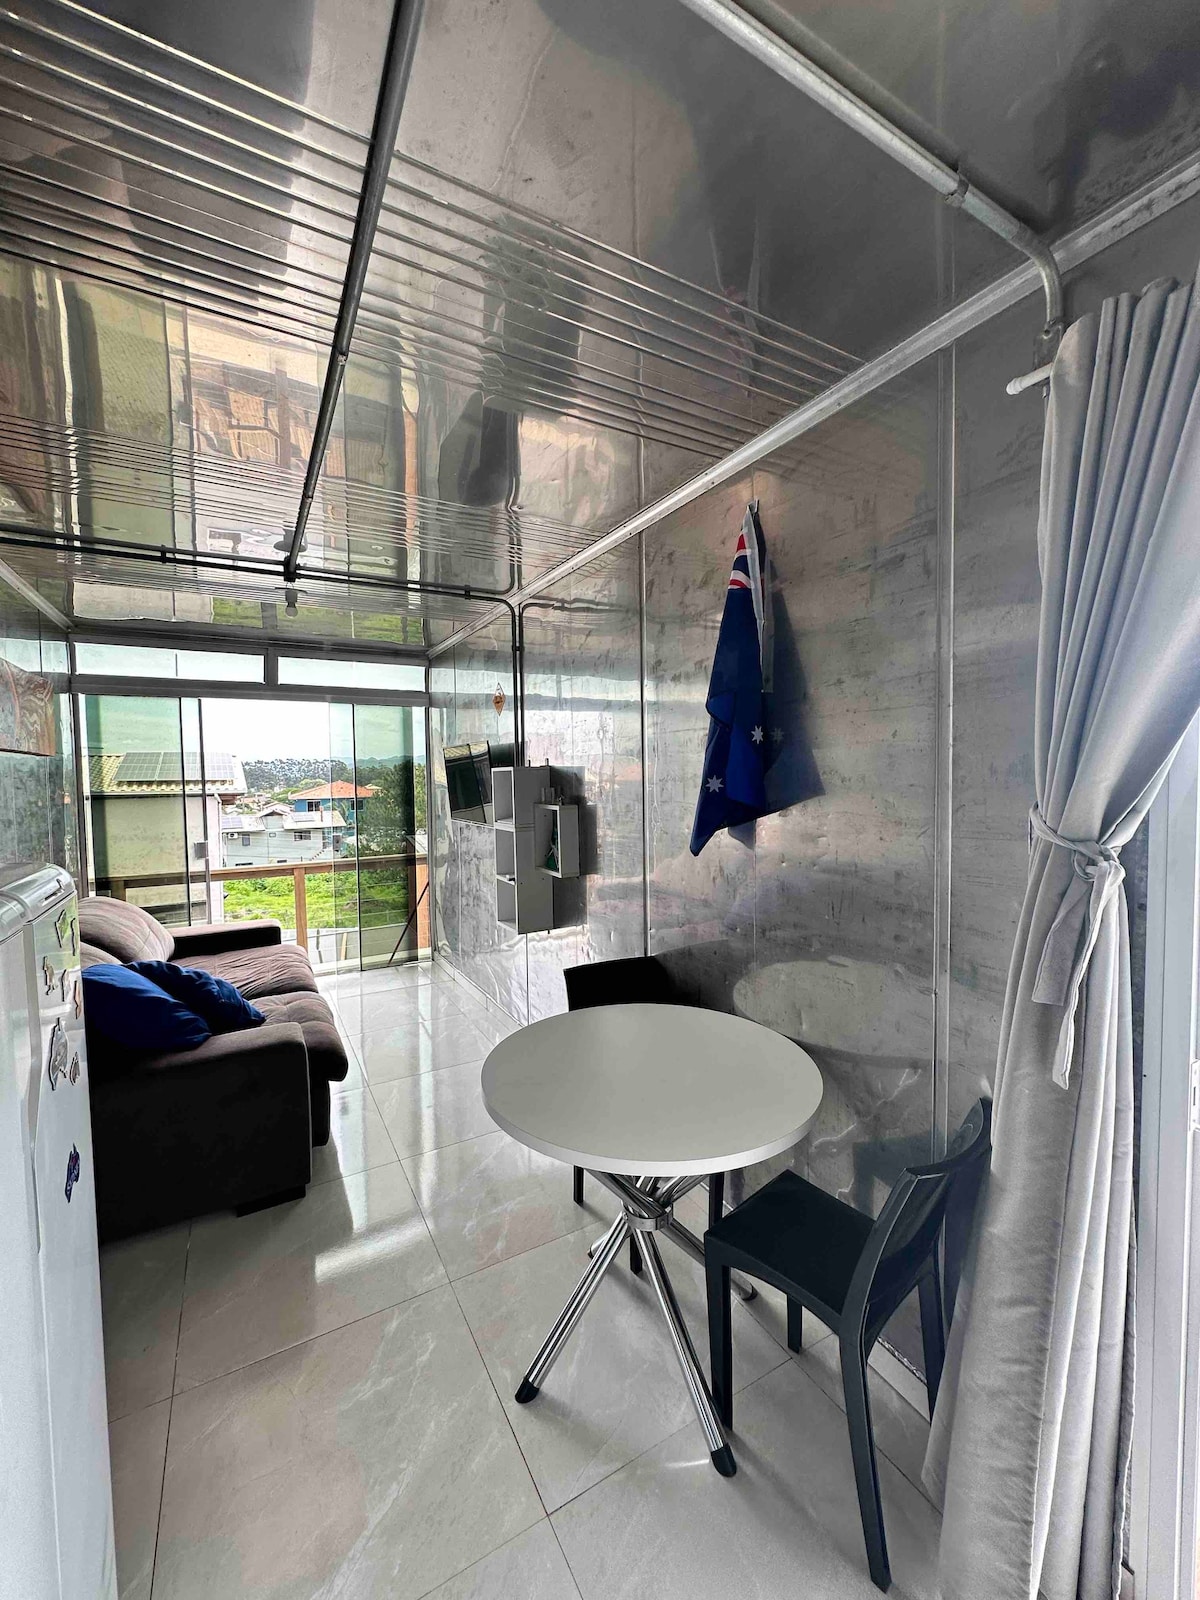 #Lake View Guest House - Container Sydney